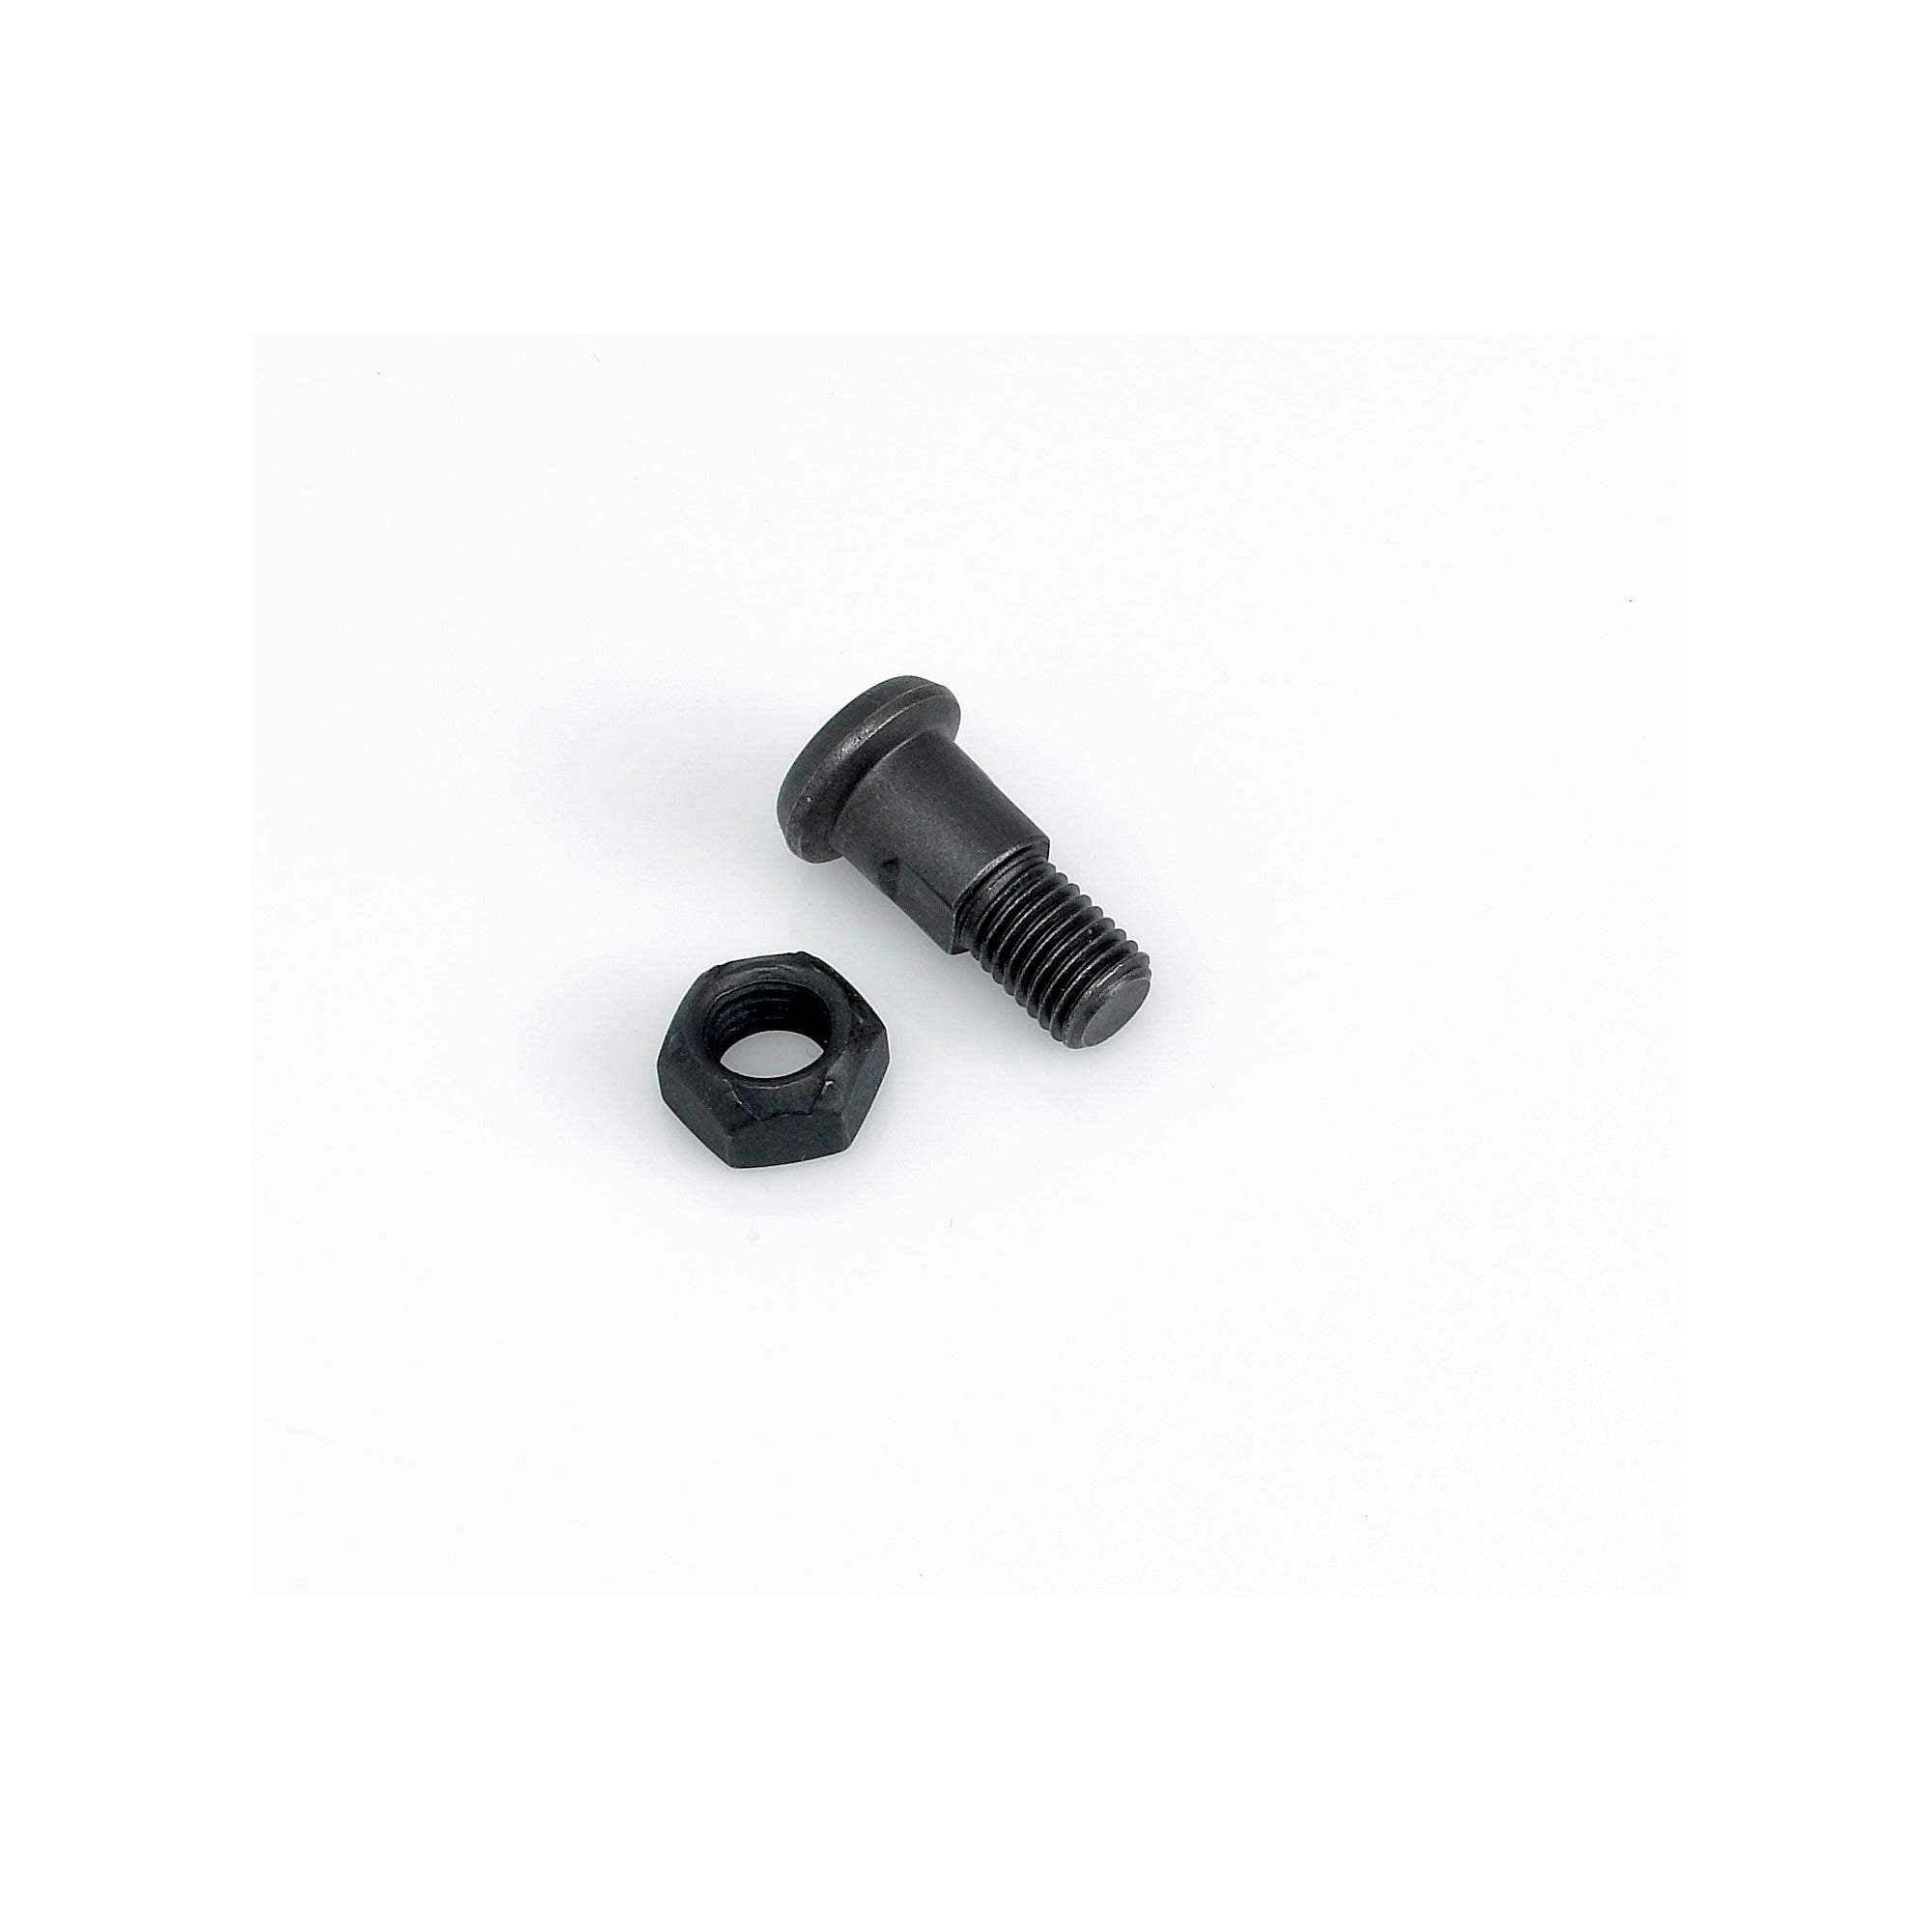 Replacement Pivot Bolt and Nut for Bypass Pruners